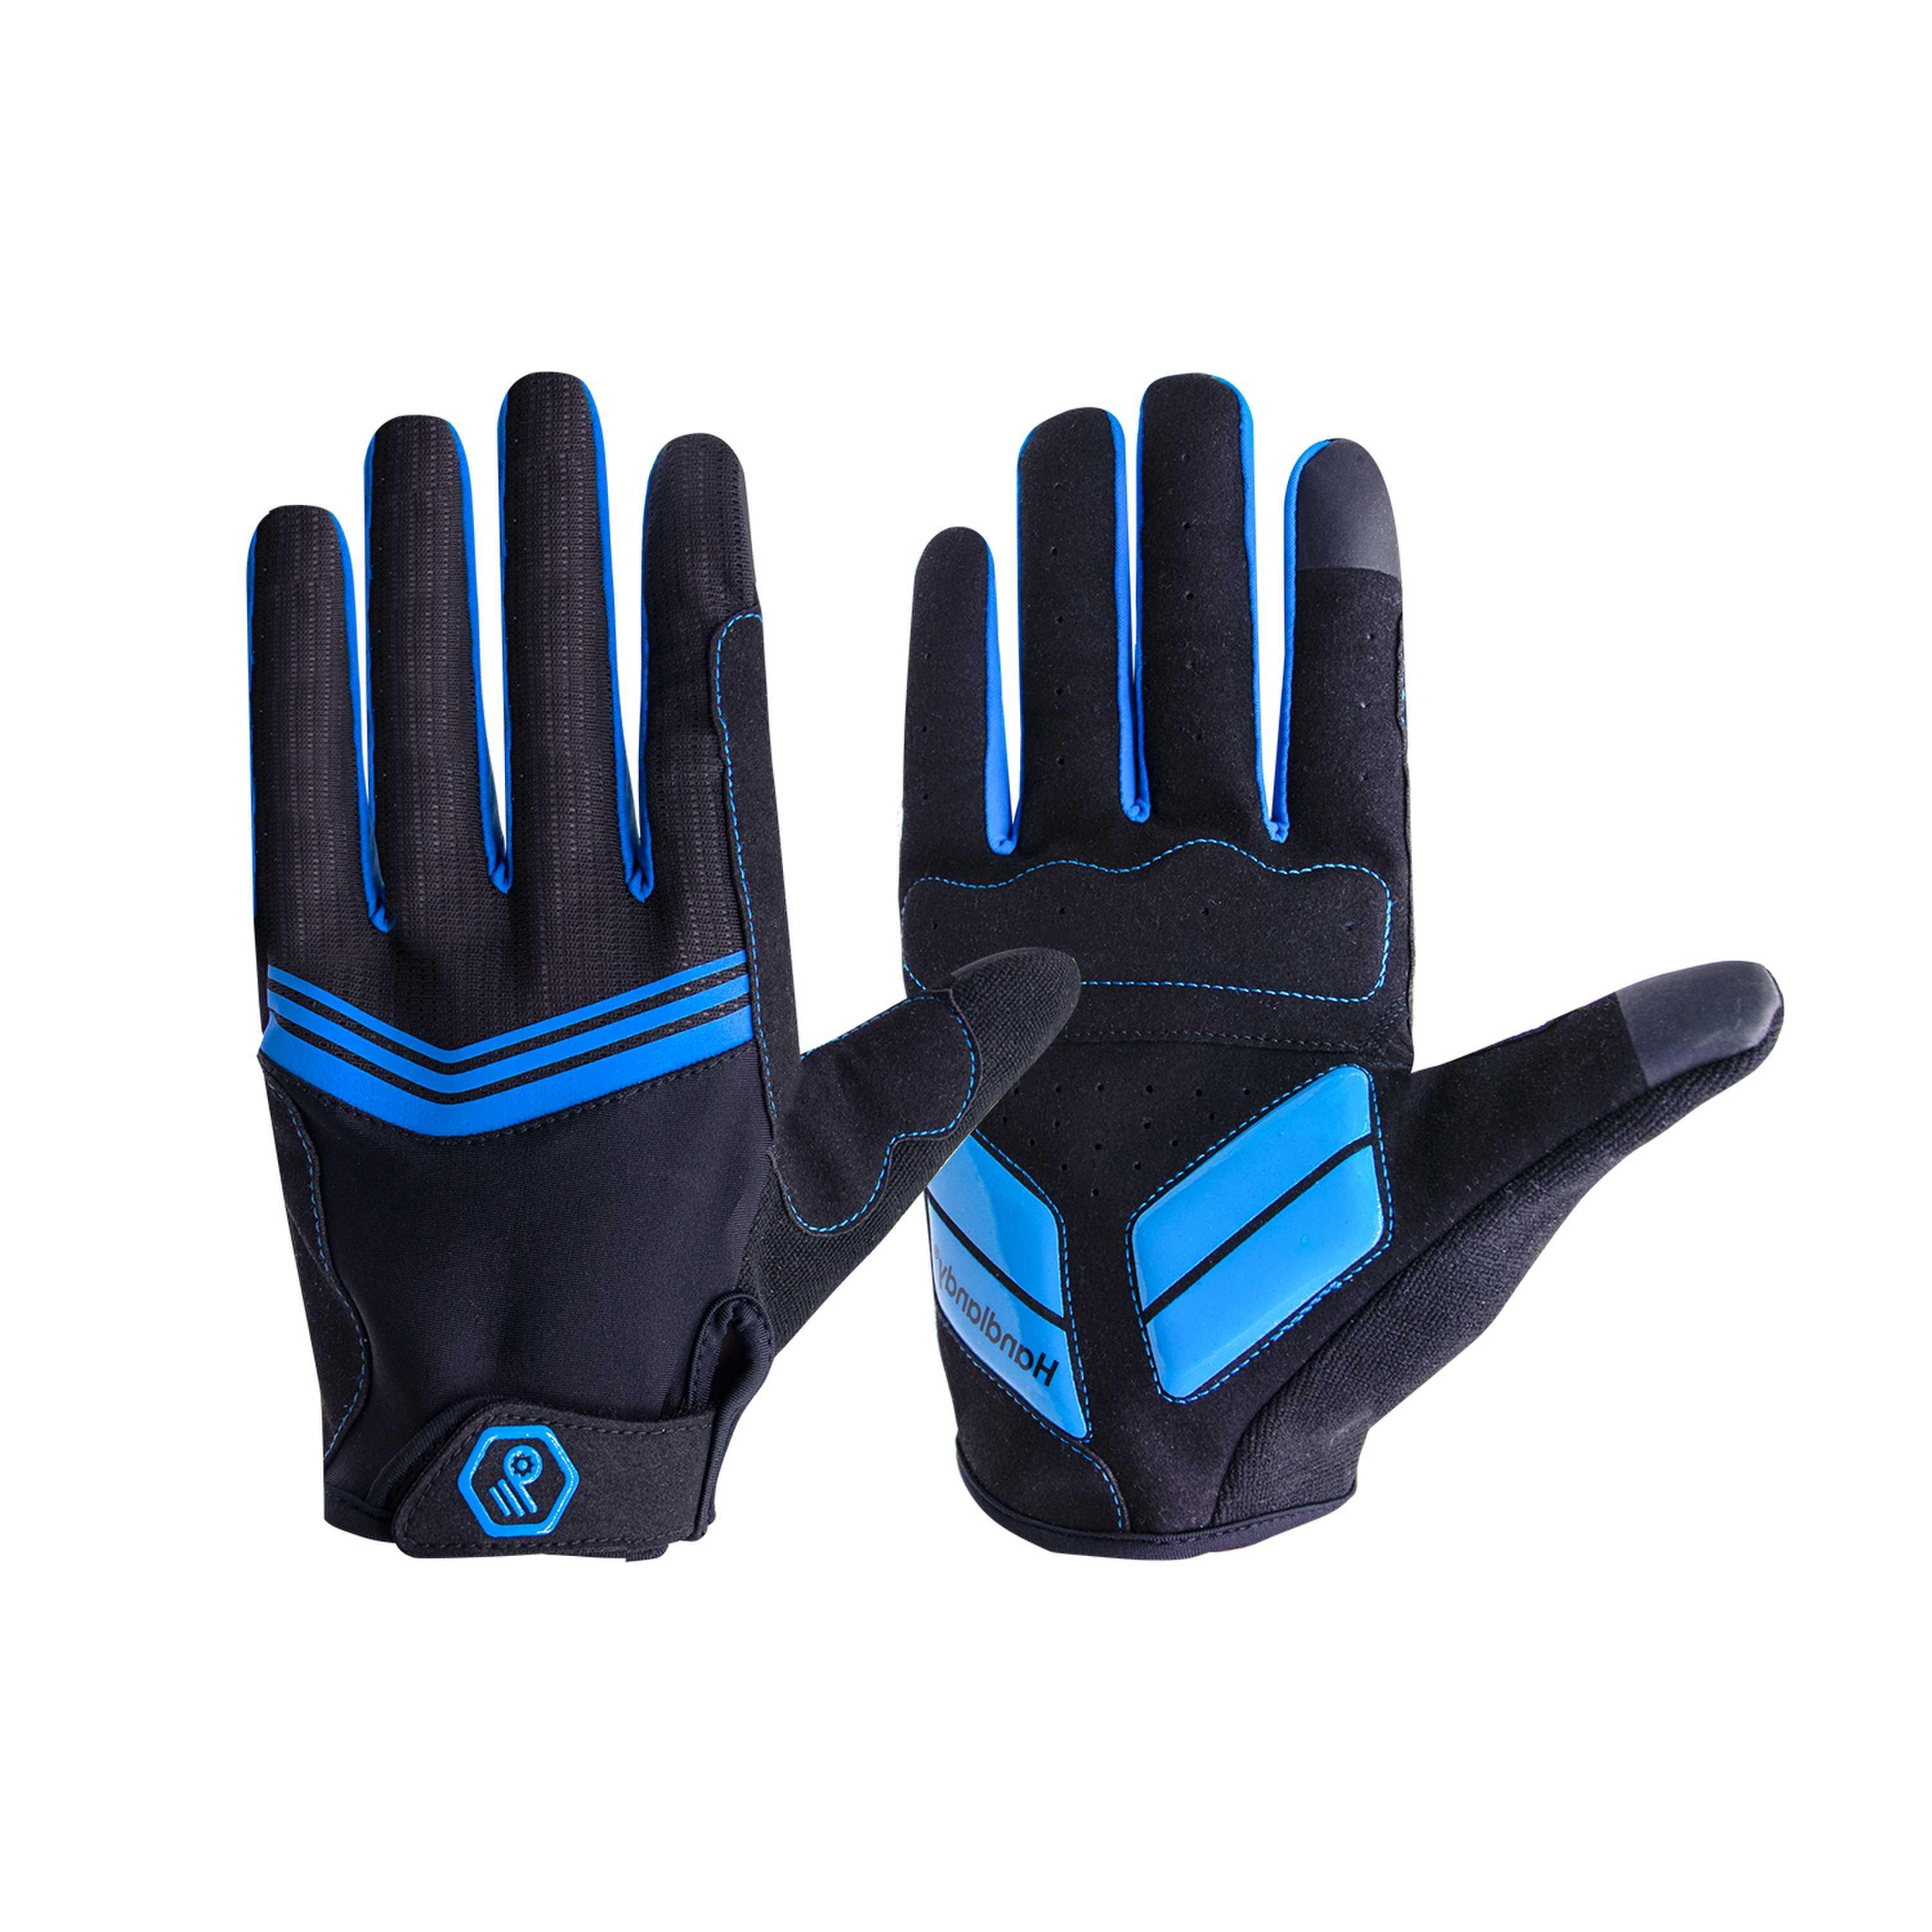 S711 PRI custom blue synthetic palm SBR padding outdoor bicycle light motorcycle cycling bike hand other sports gloves